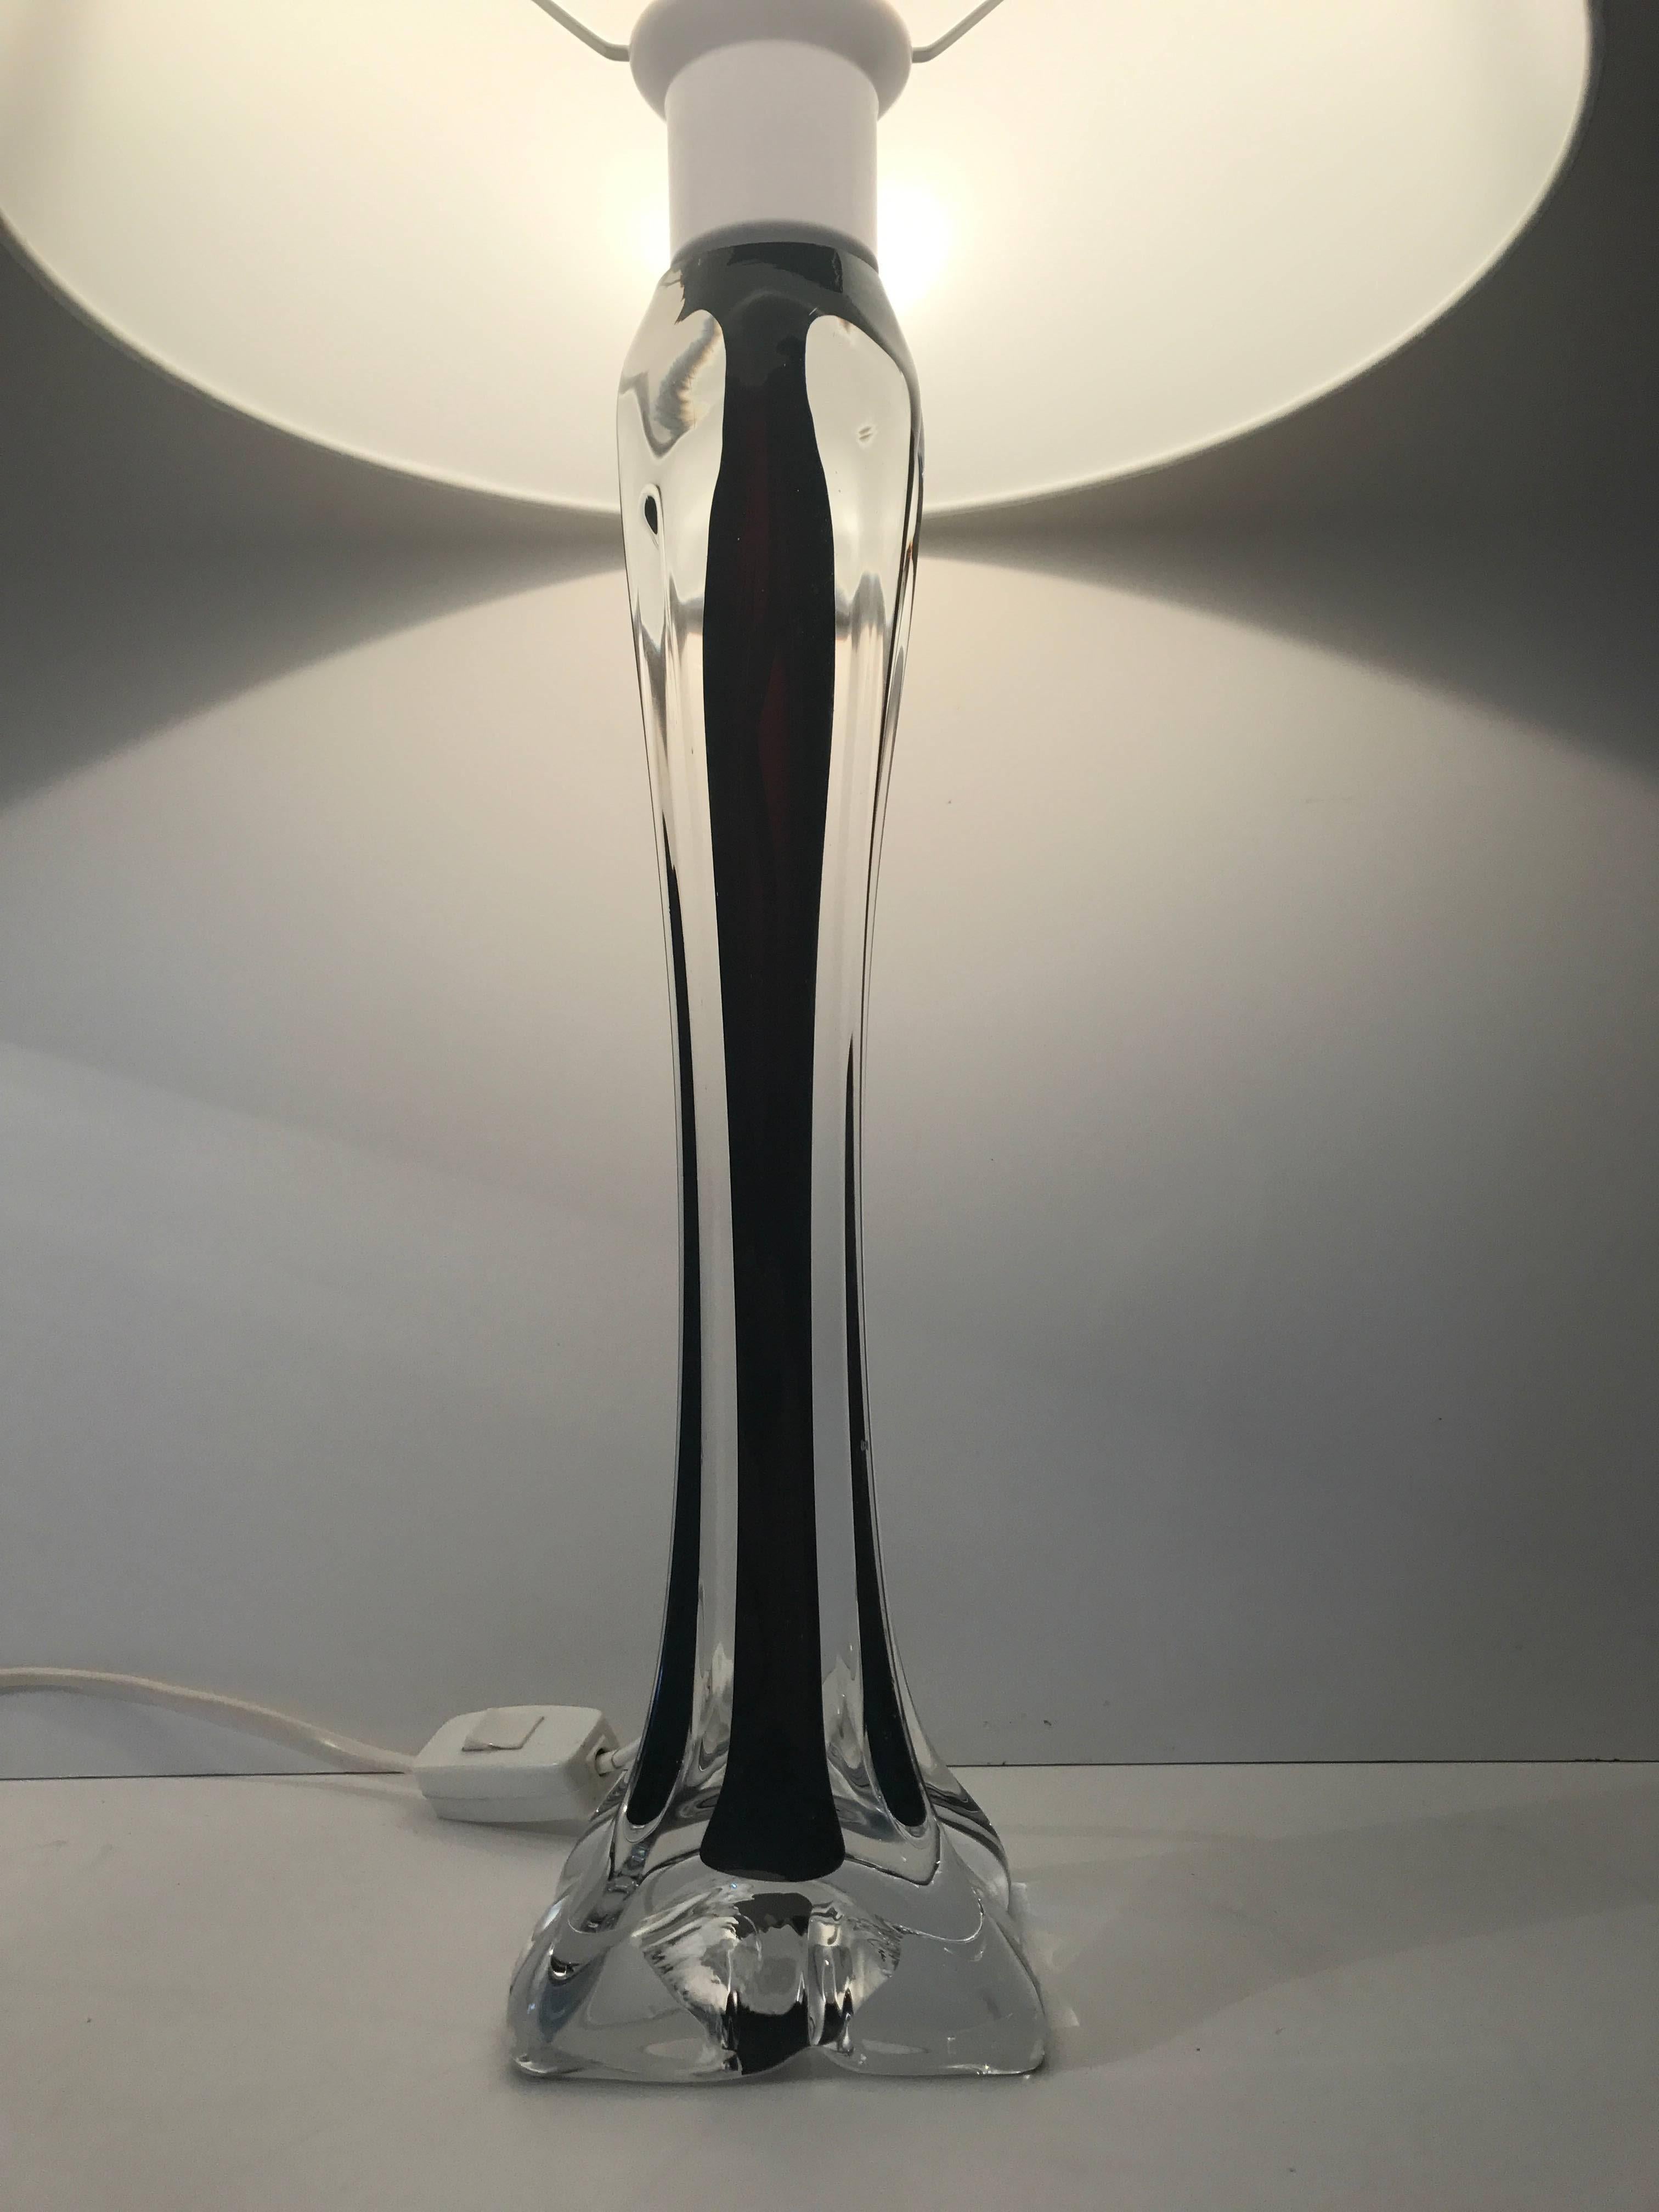 Pair of 1950 large Swedish Flygsfors crystal glass table lamps Paul Kedelv.
This large pair is made of handmade glass and the design is made by Paul Kedelv at Flygsfors. This pair has a beautiful dark purple core of glass inside in the middle and